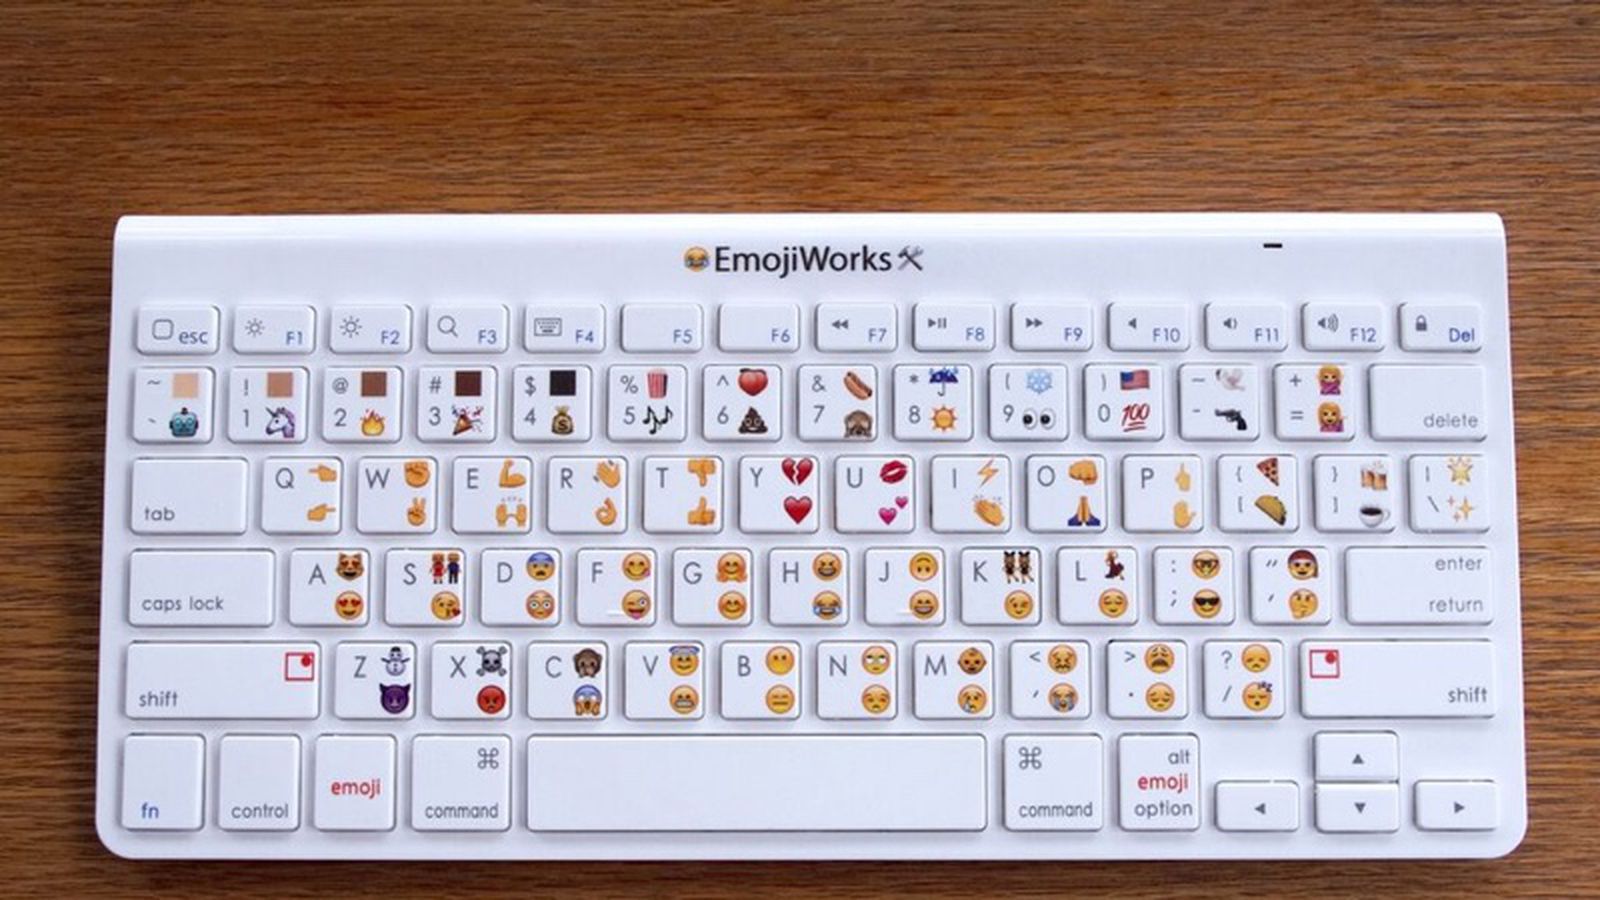 Physical 'Emoji Keyboard' For Macs And Ios Devices Lets You Type Emoji  Faster - Macrumors